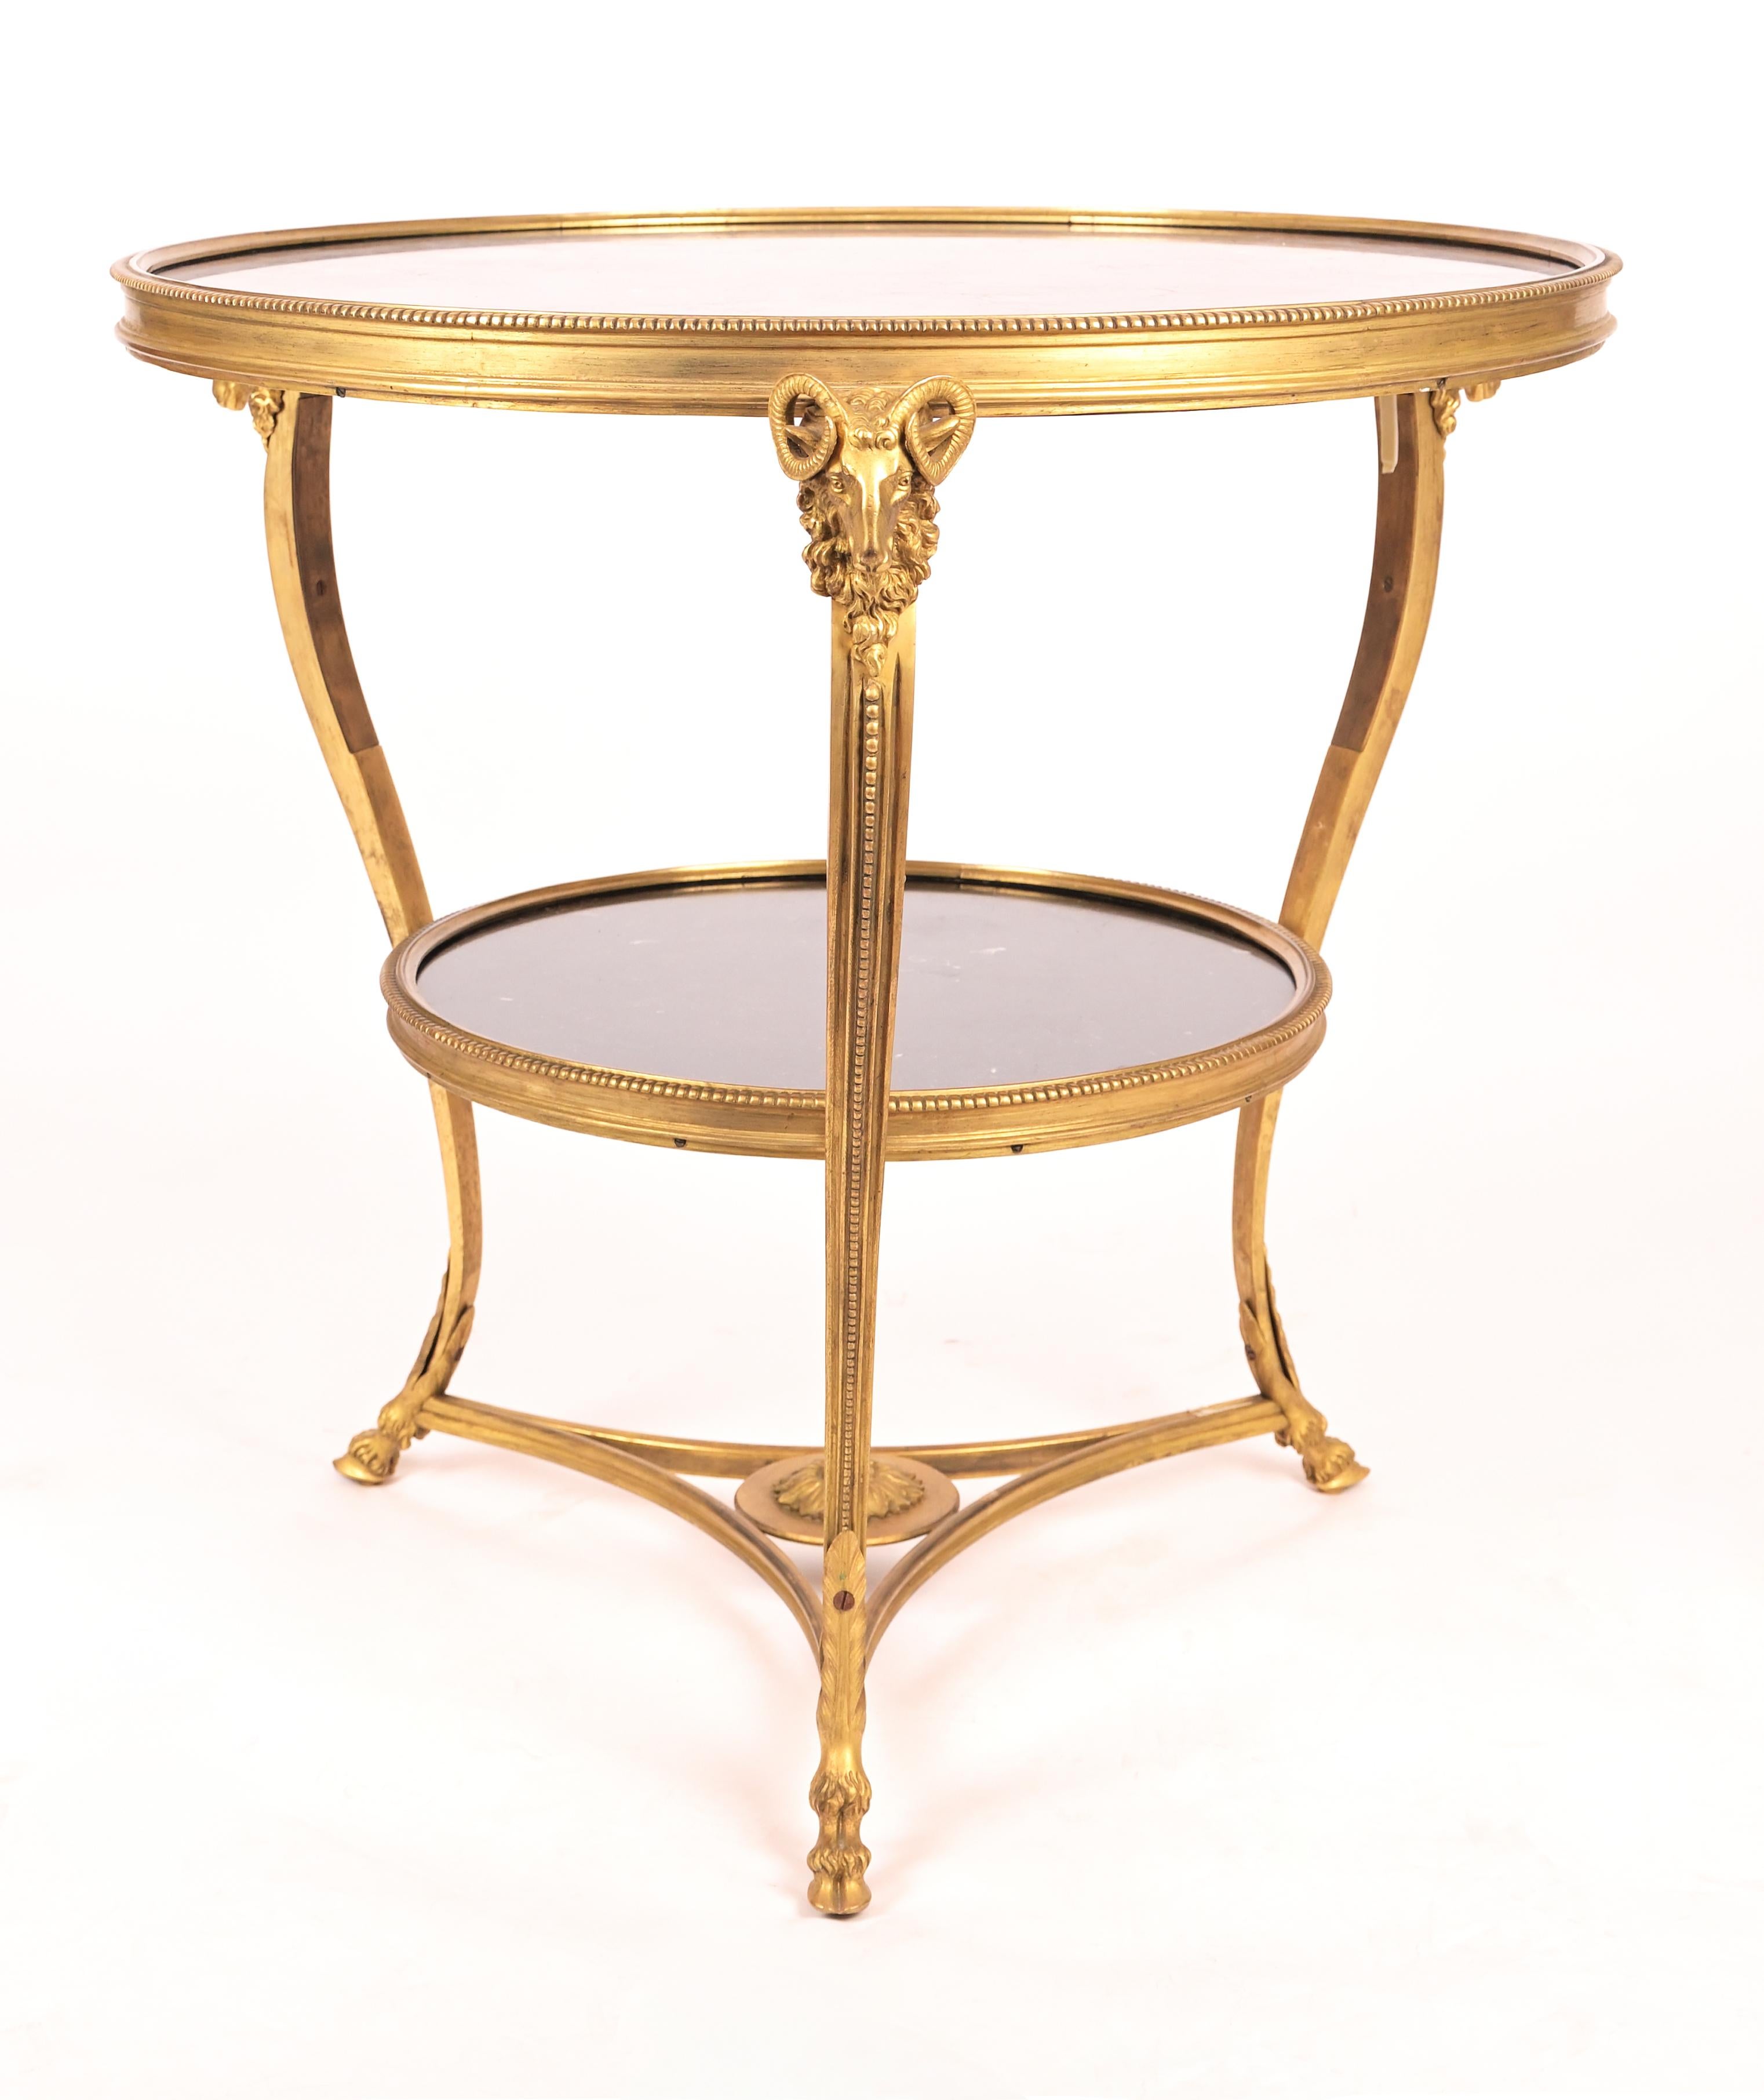 A French Louis XV- style gueridon. The two tiered bronze frame with inset black marble surfaces respected diameters 28